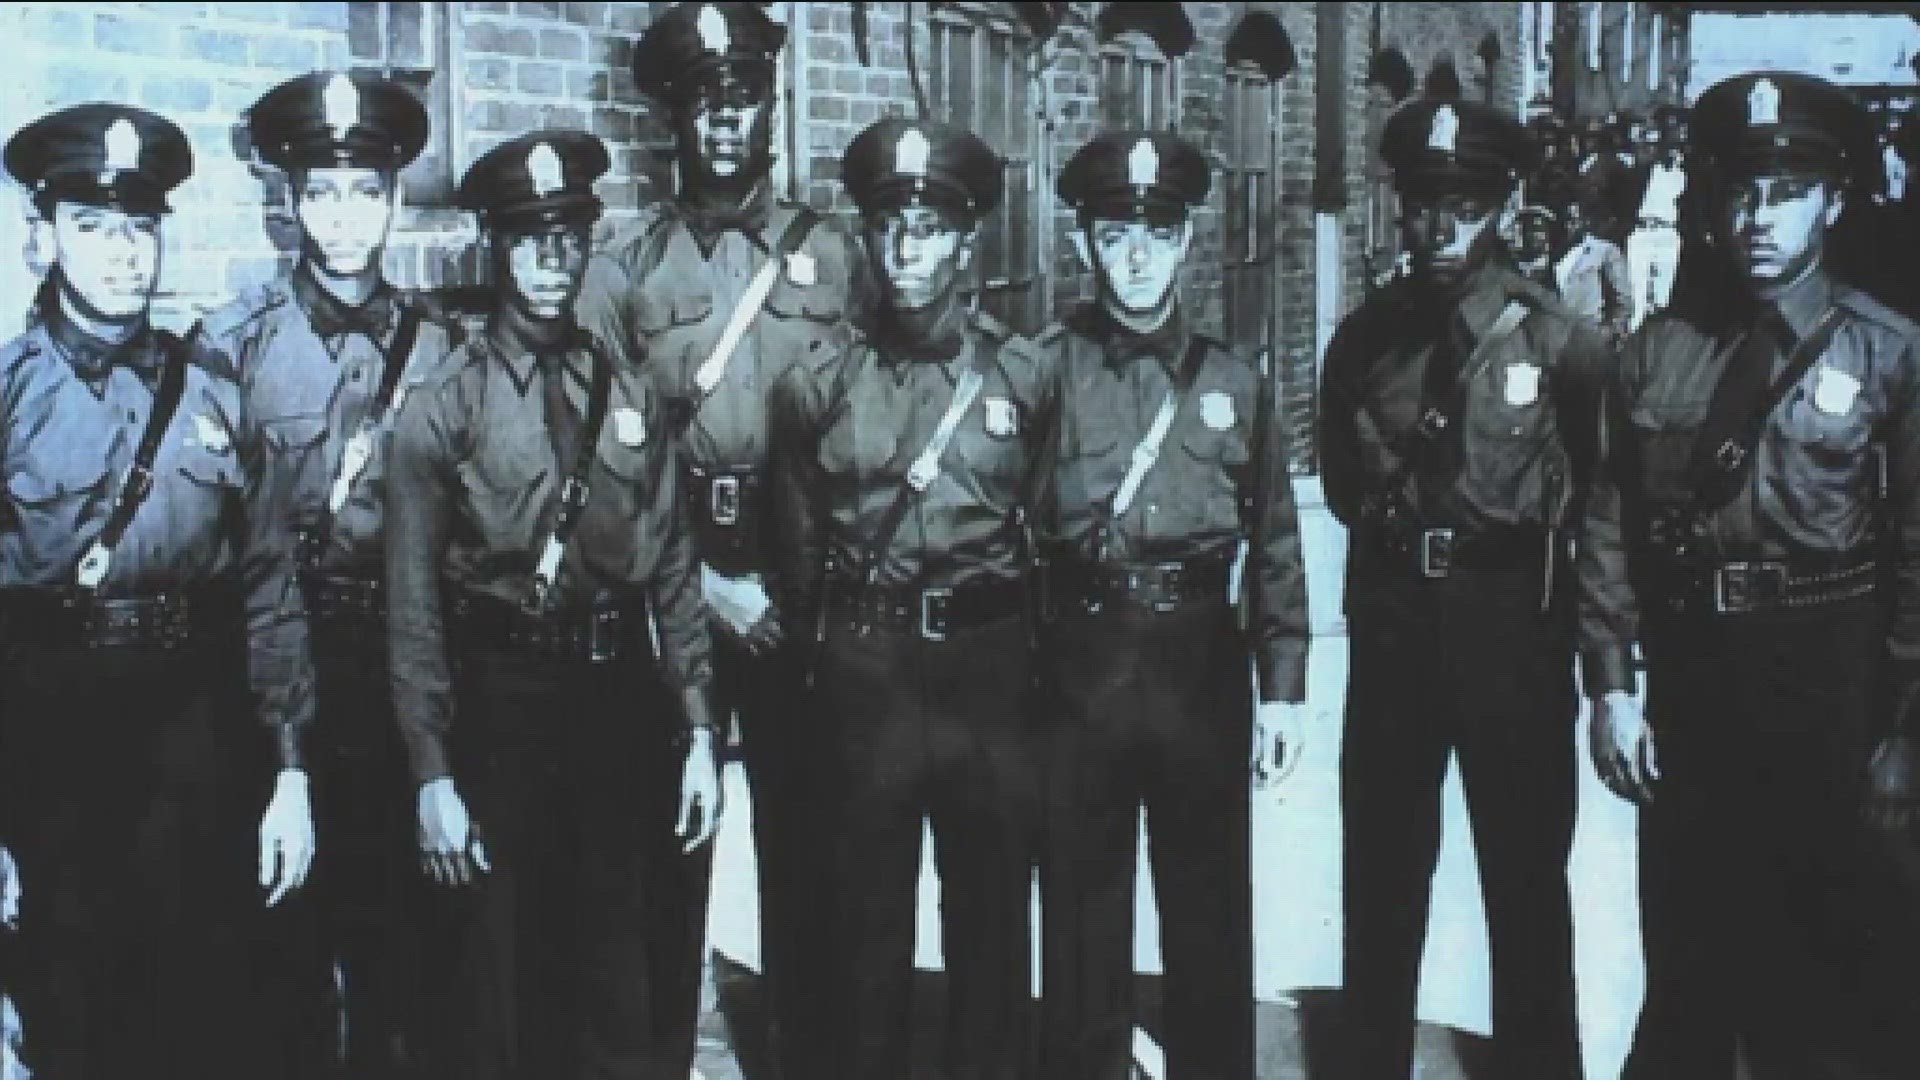 The Atlanta Police Department and Atlanta Police Historical Society are commemorating 75 years since the first eight Black officers joined the force.